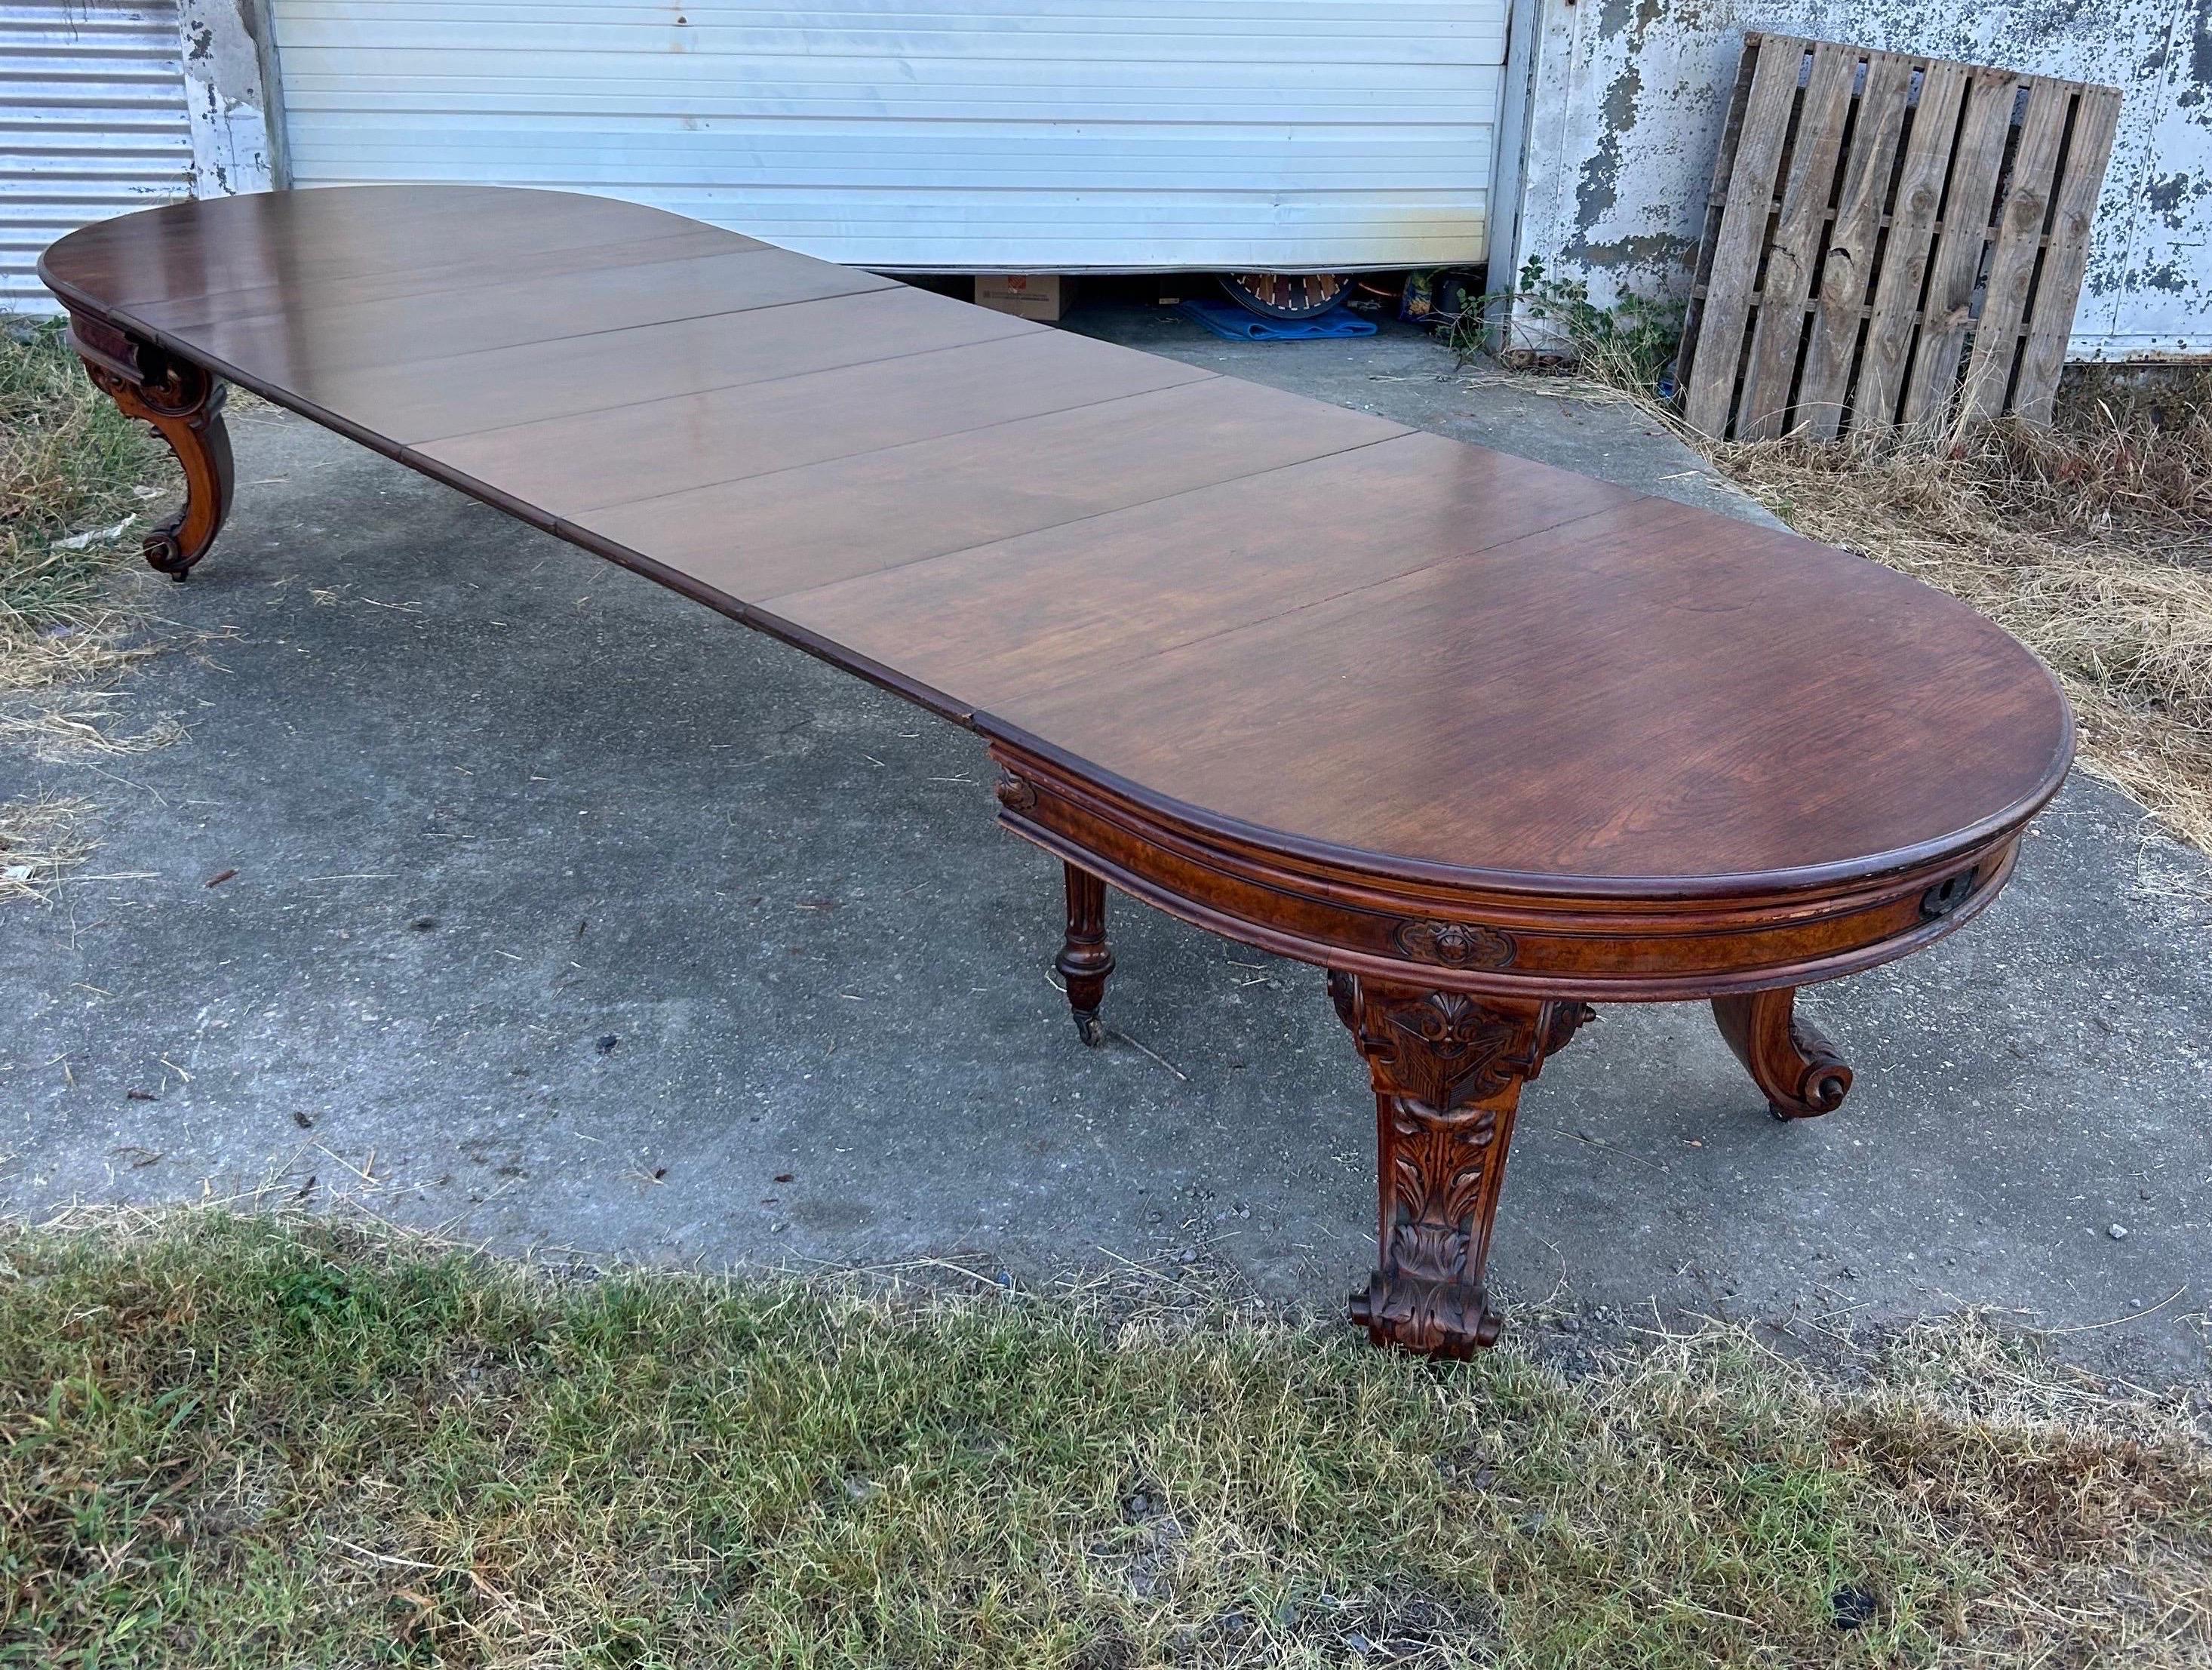 Gorgeous color and patina in this over the top fine 19th century American mahogany extension dining table. Likely made in Philadelphia in the second half of the 19th century for an important main line home, this table features the finest timbers and